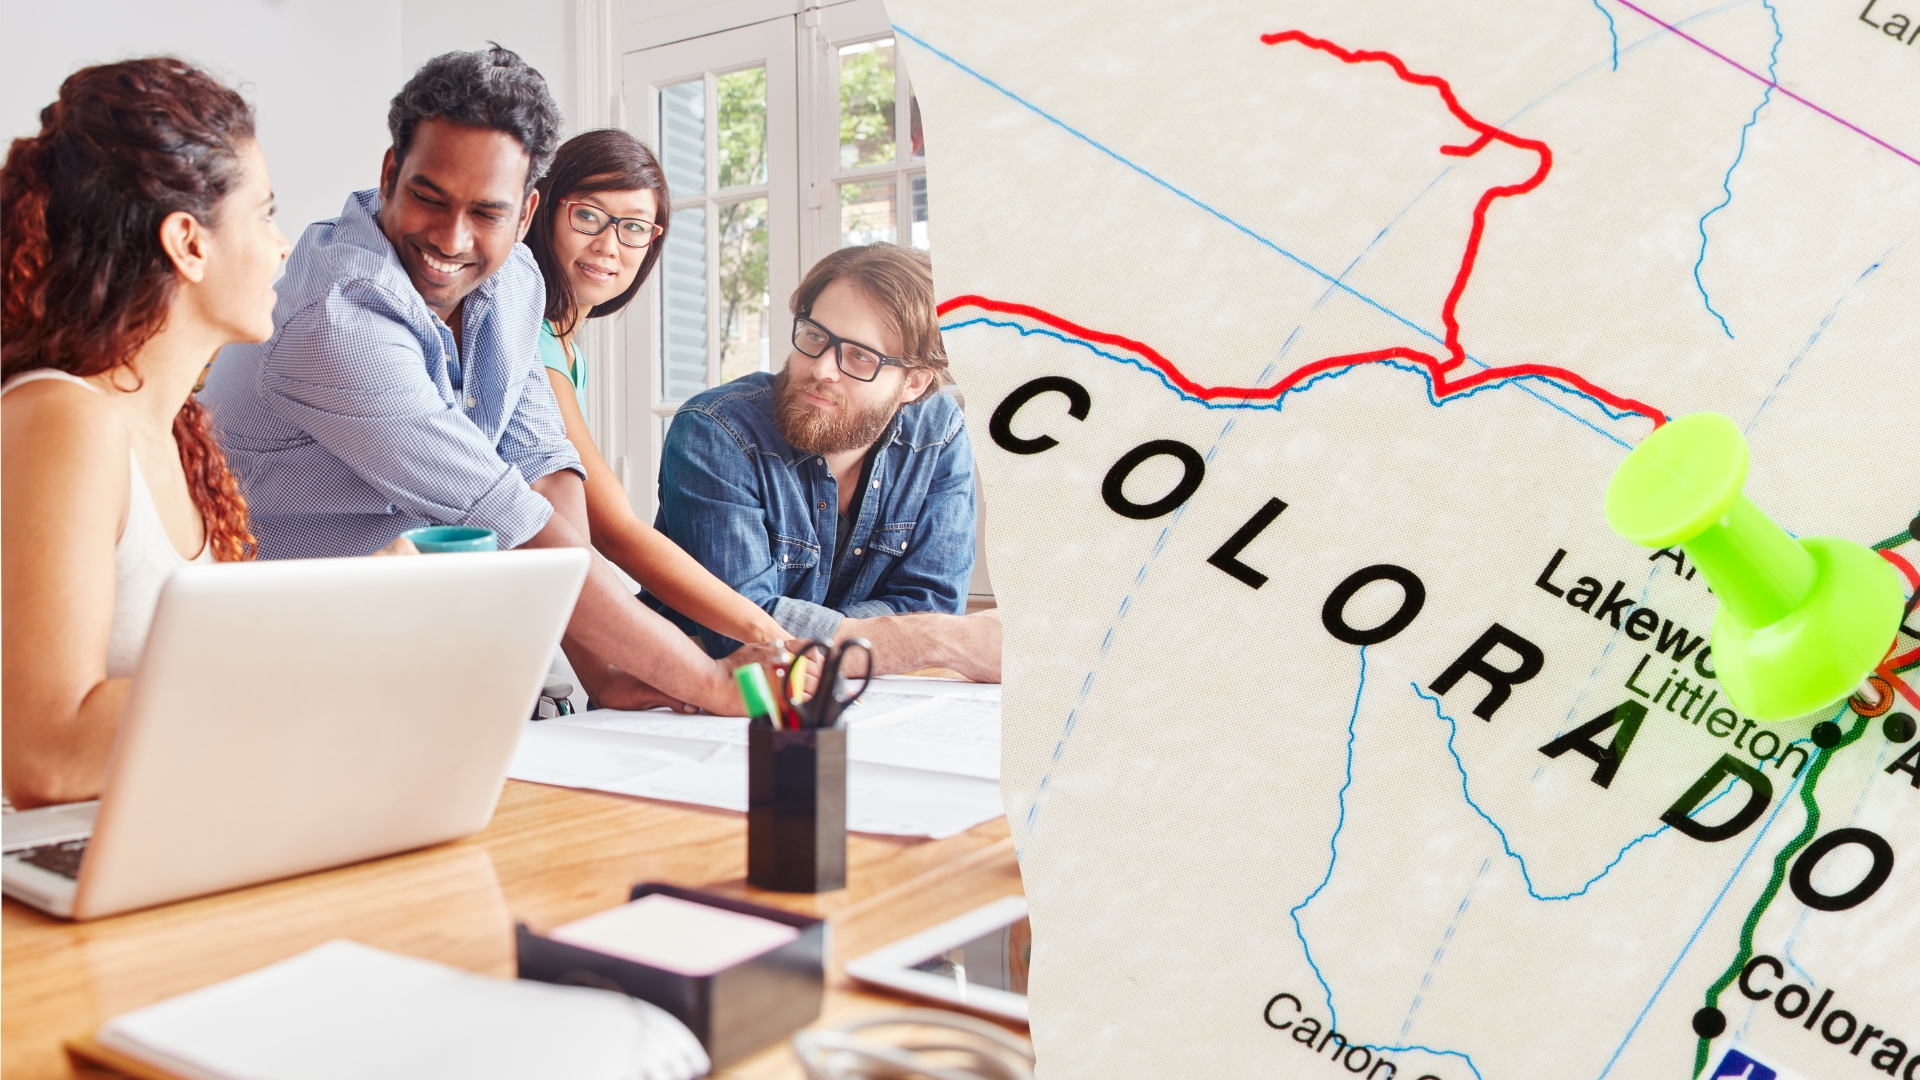 MBA Programs in Colorado - featured image